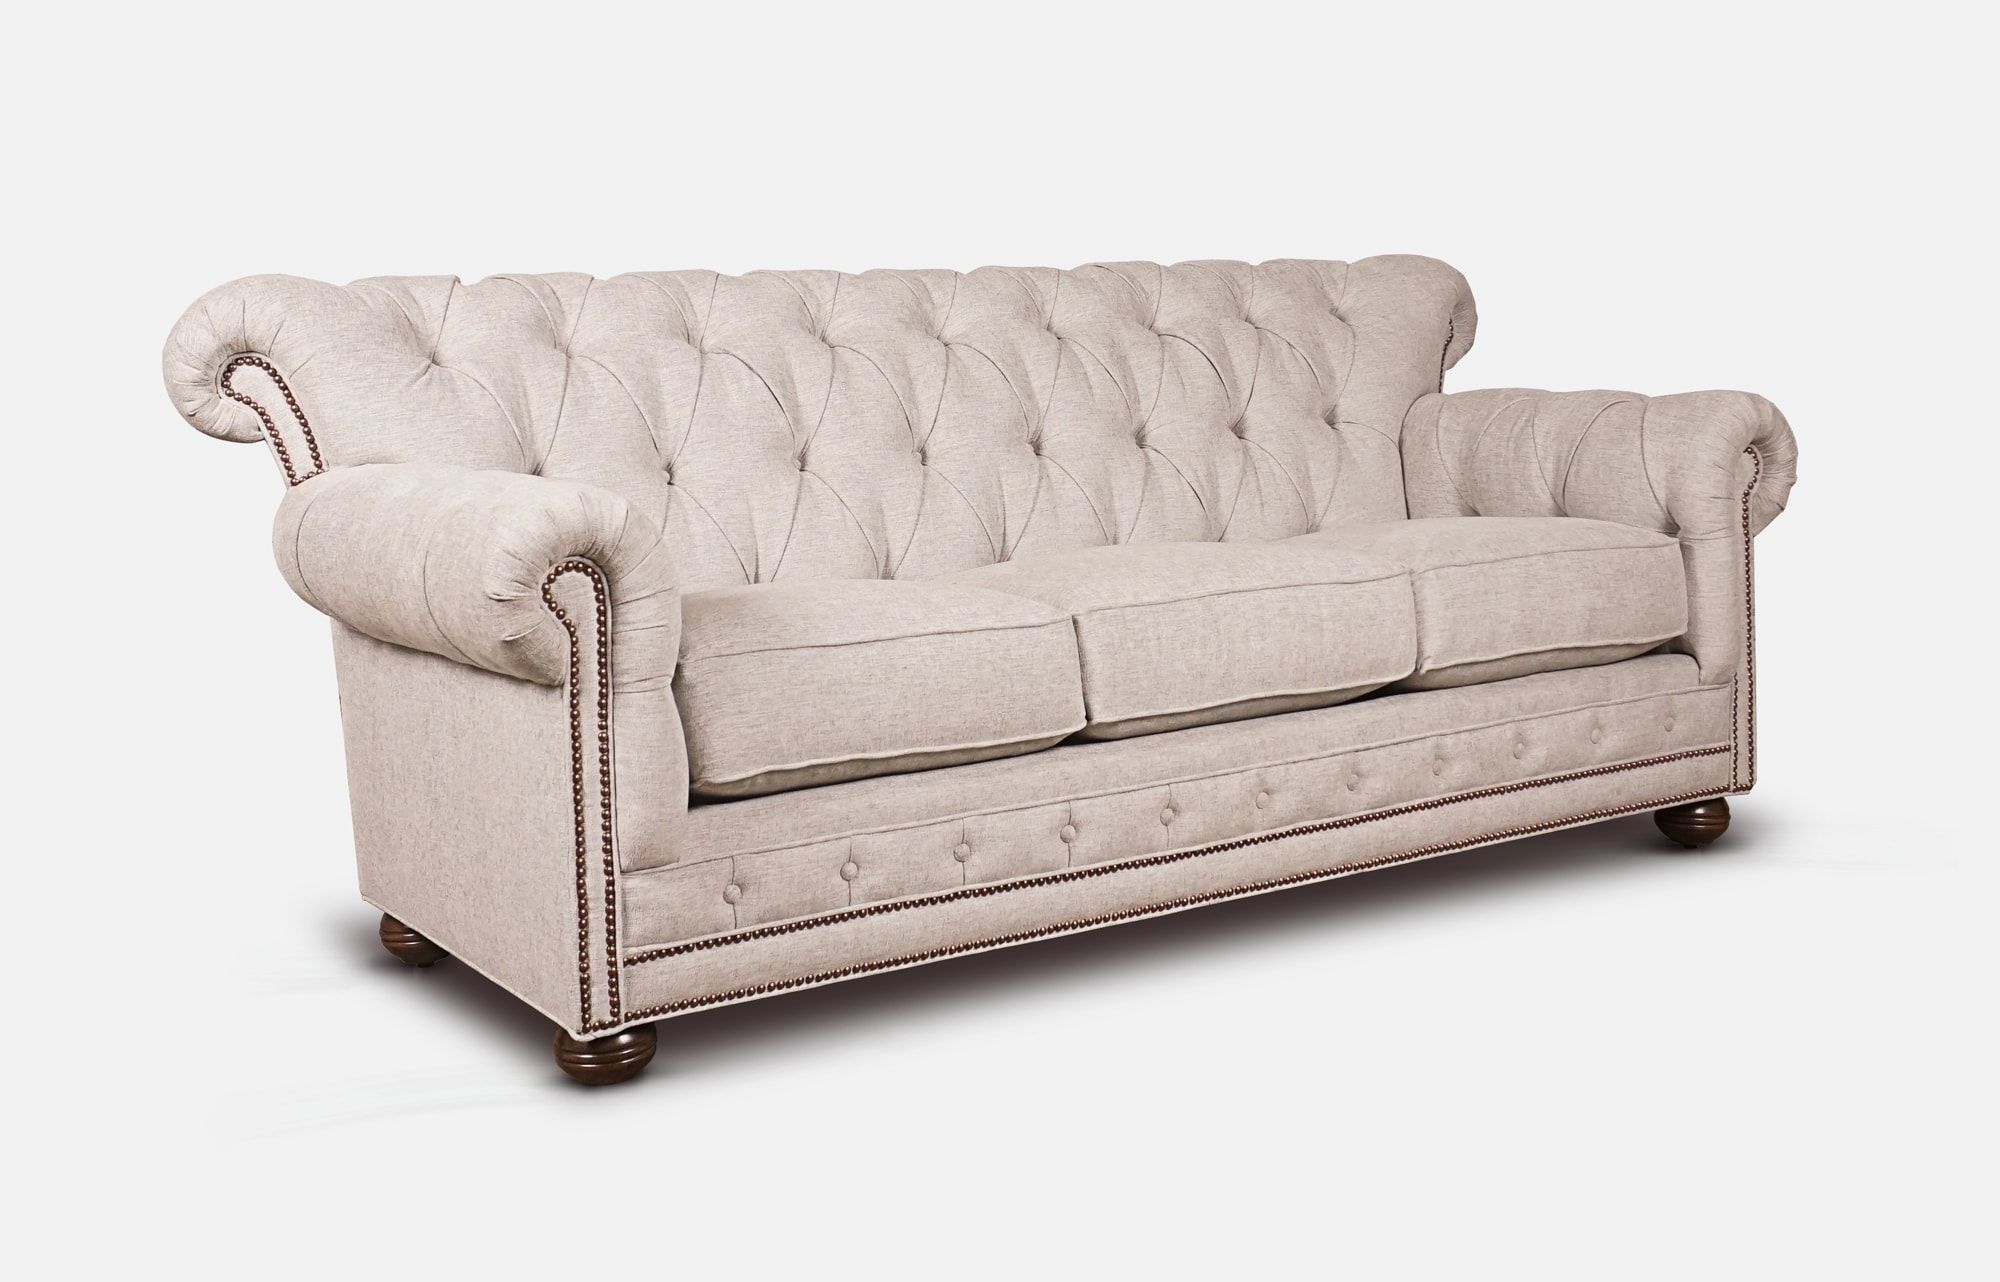 Oiao Eleanor High Back Tufted Chesterfield Sofa Side Angle | Of Iron & Oak With Regard To Tufted Upholstered Sofas (Gallery 13 of 20)